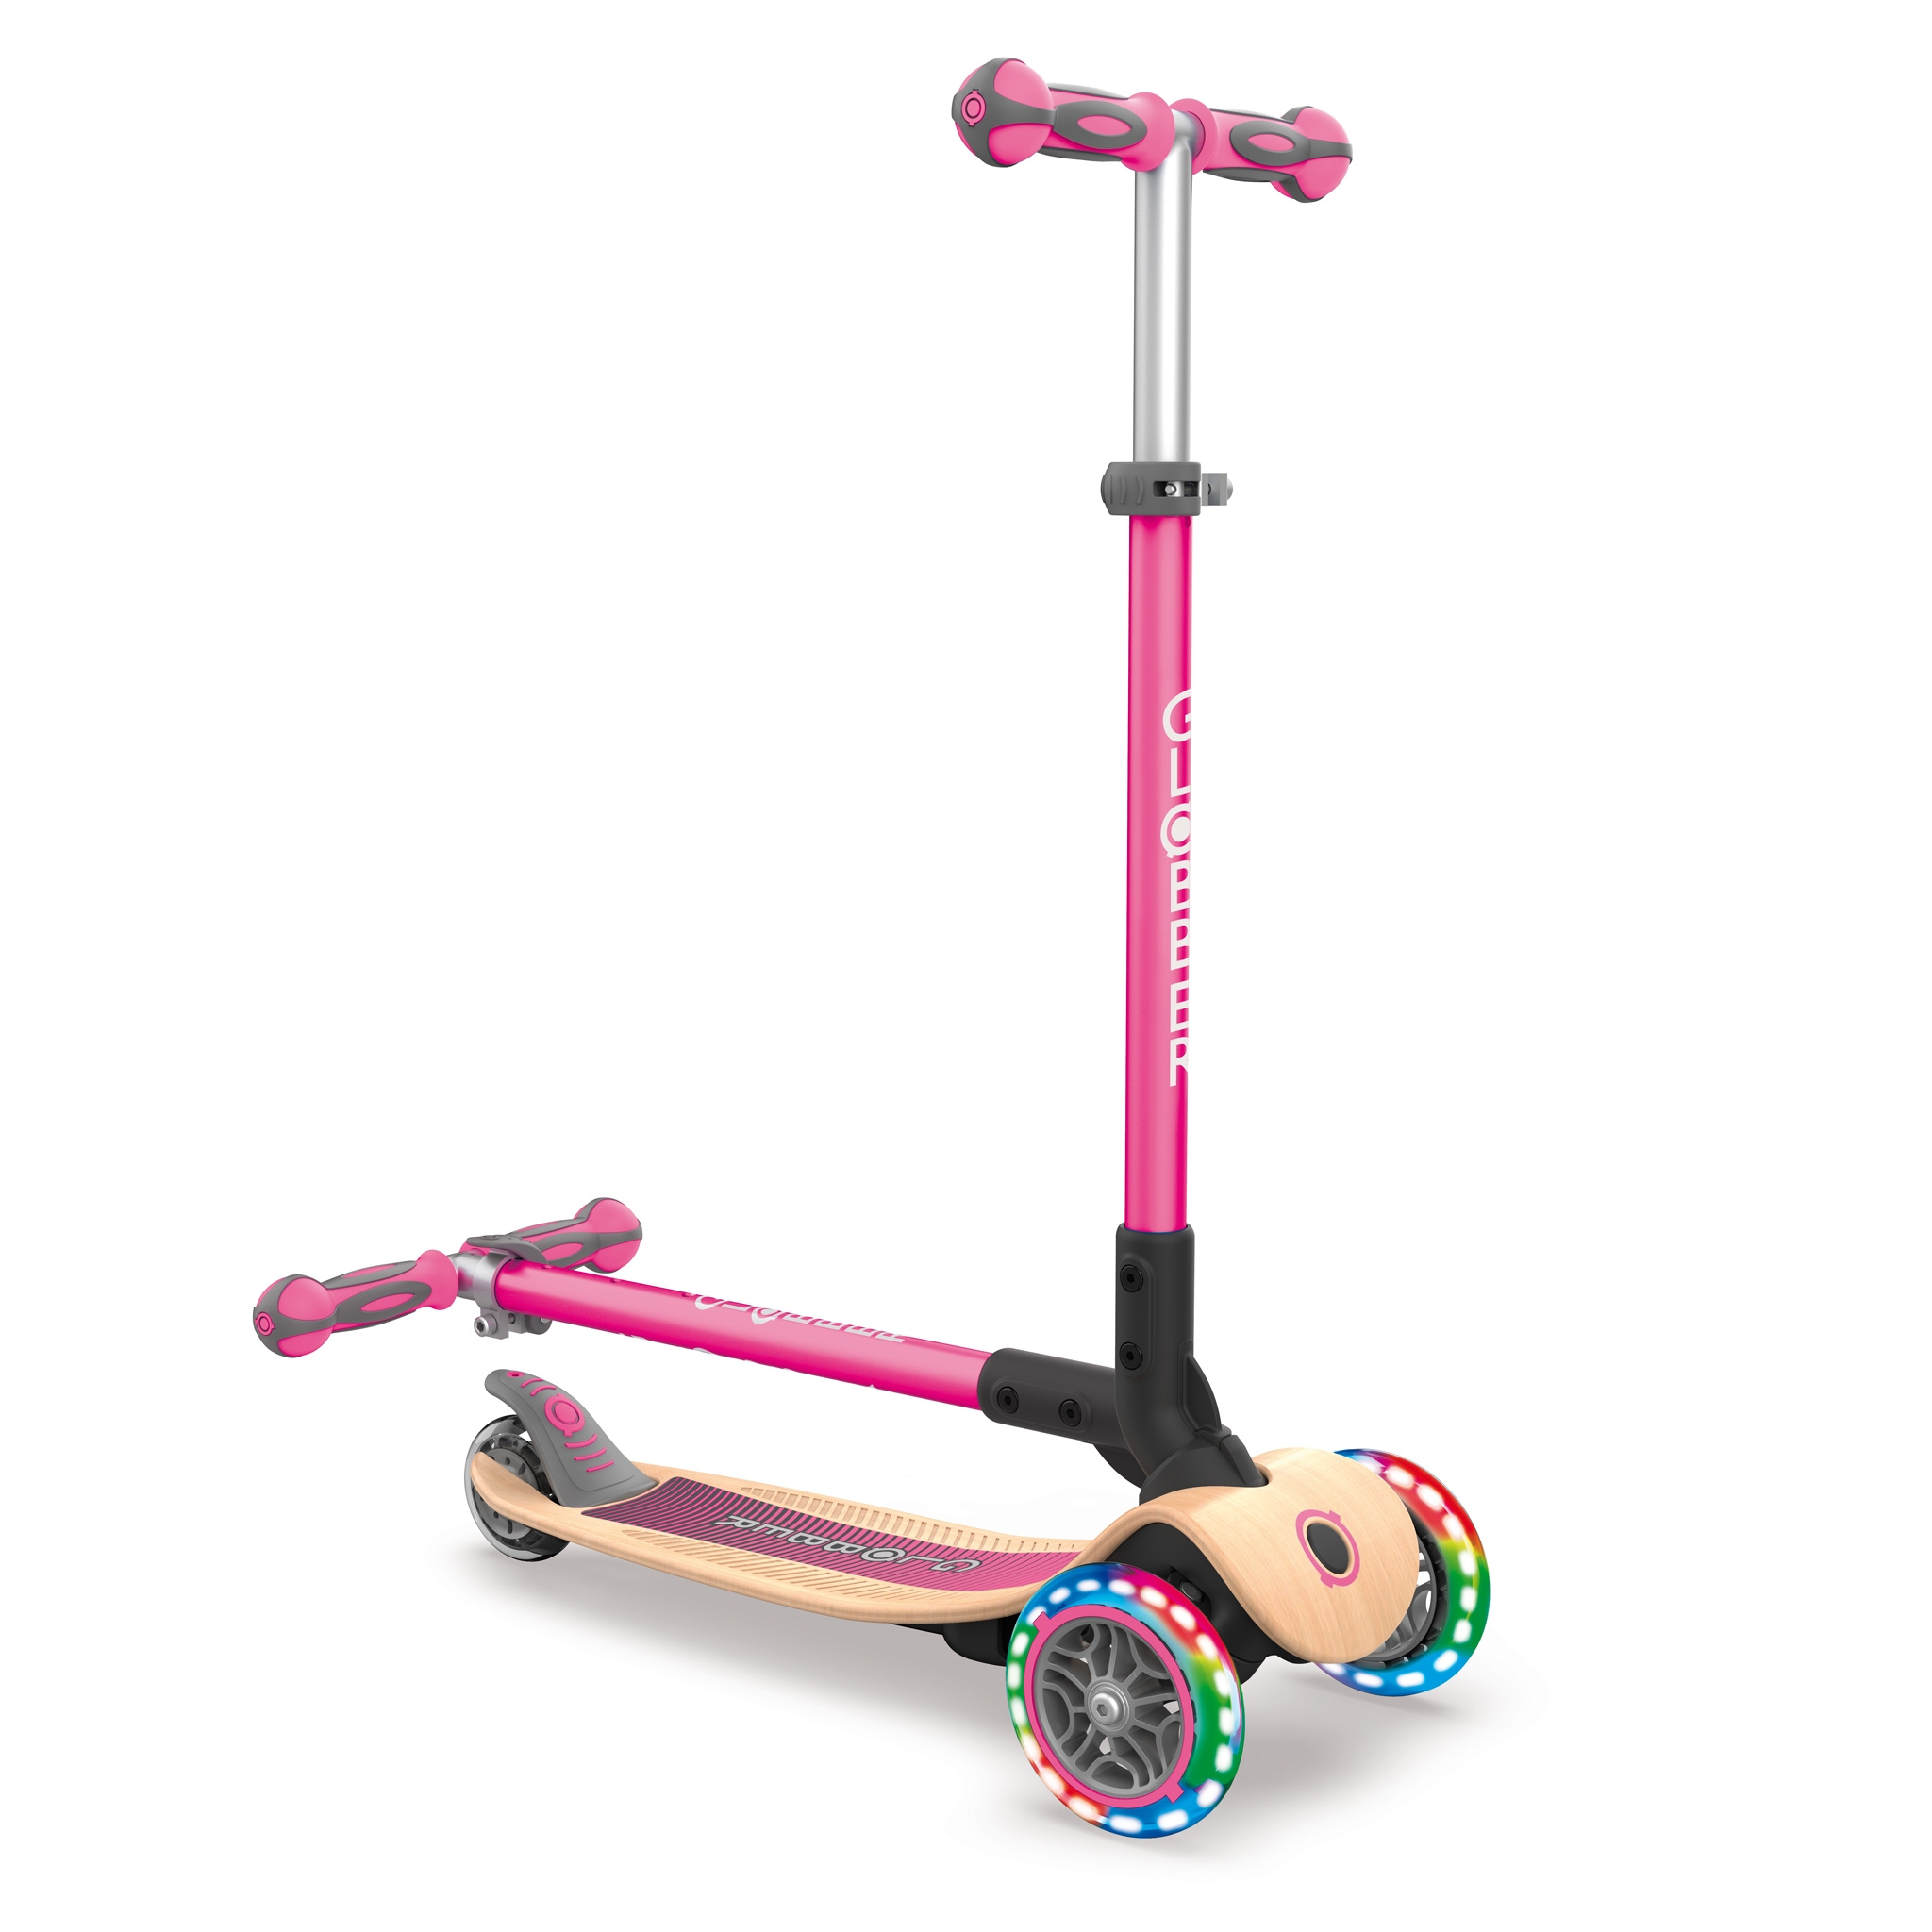 PRIMO-FOLDABLE-WOOD-LIGHTS-3-wheel-foldable-scooter-with-7-ply-wooden-scooter-deck-and-battery-free-light-up-wheels_deep-pink 2